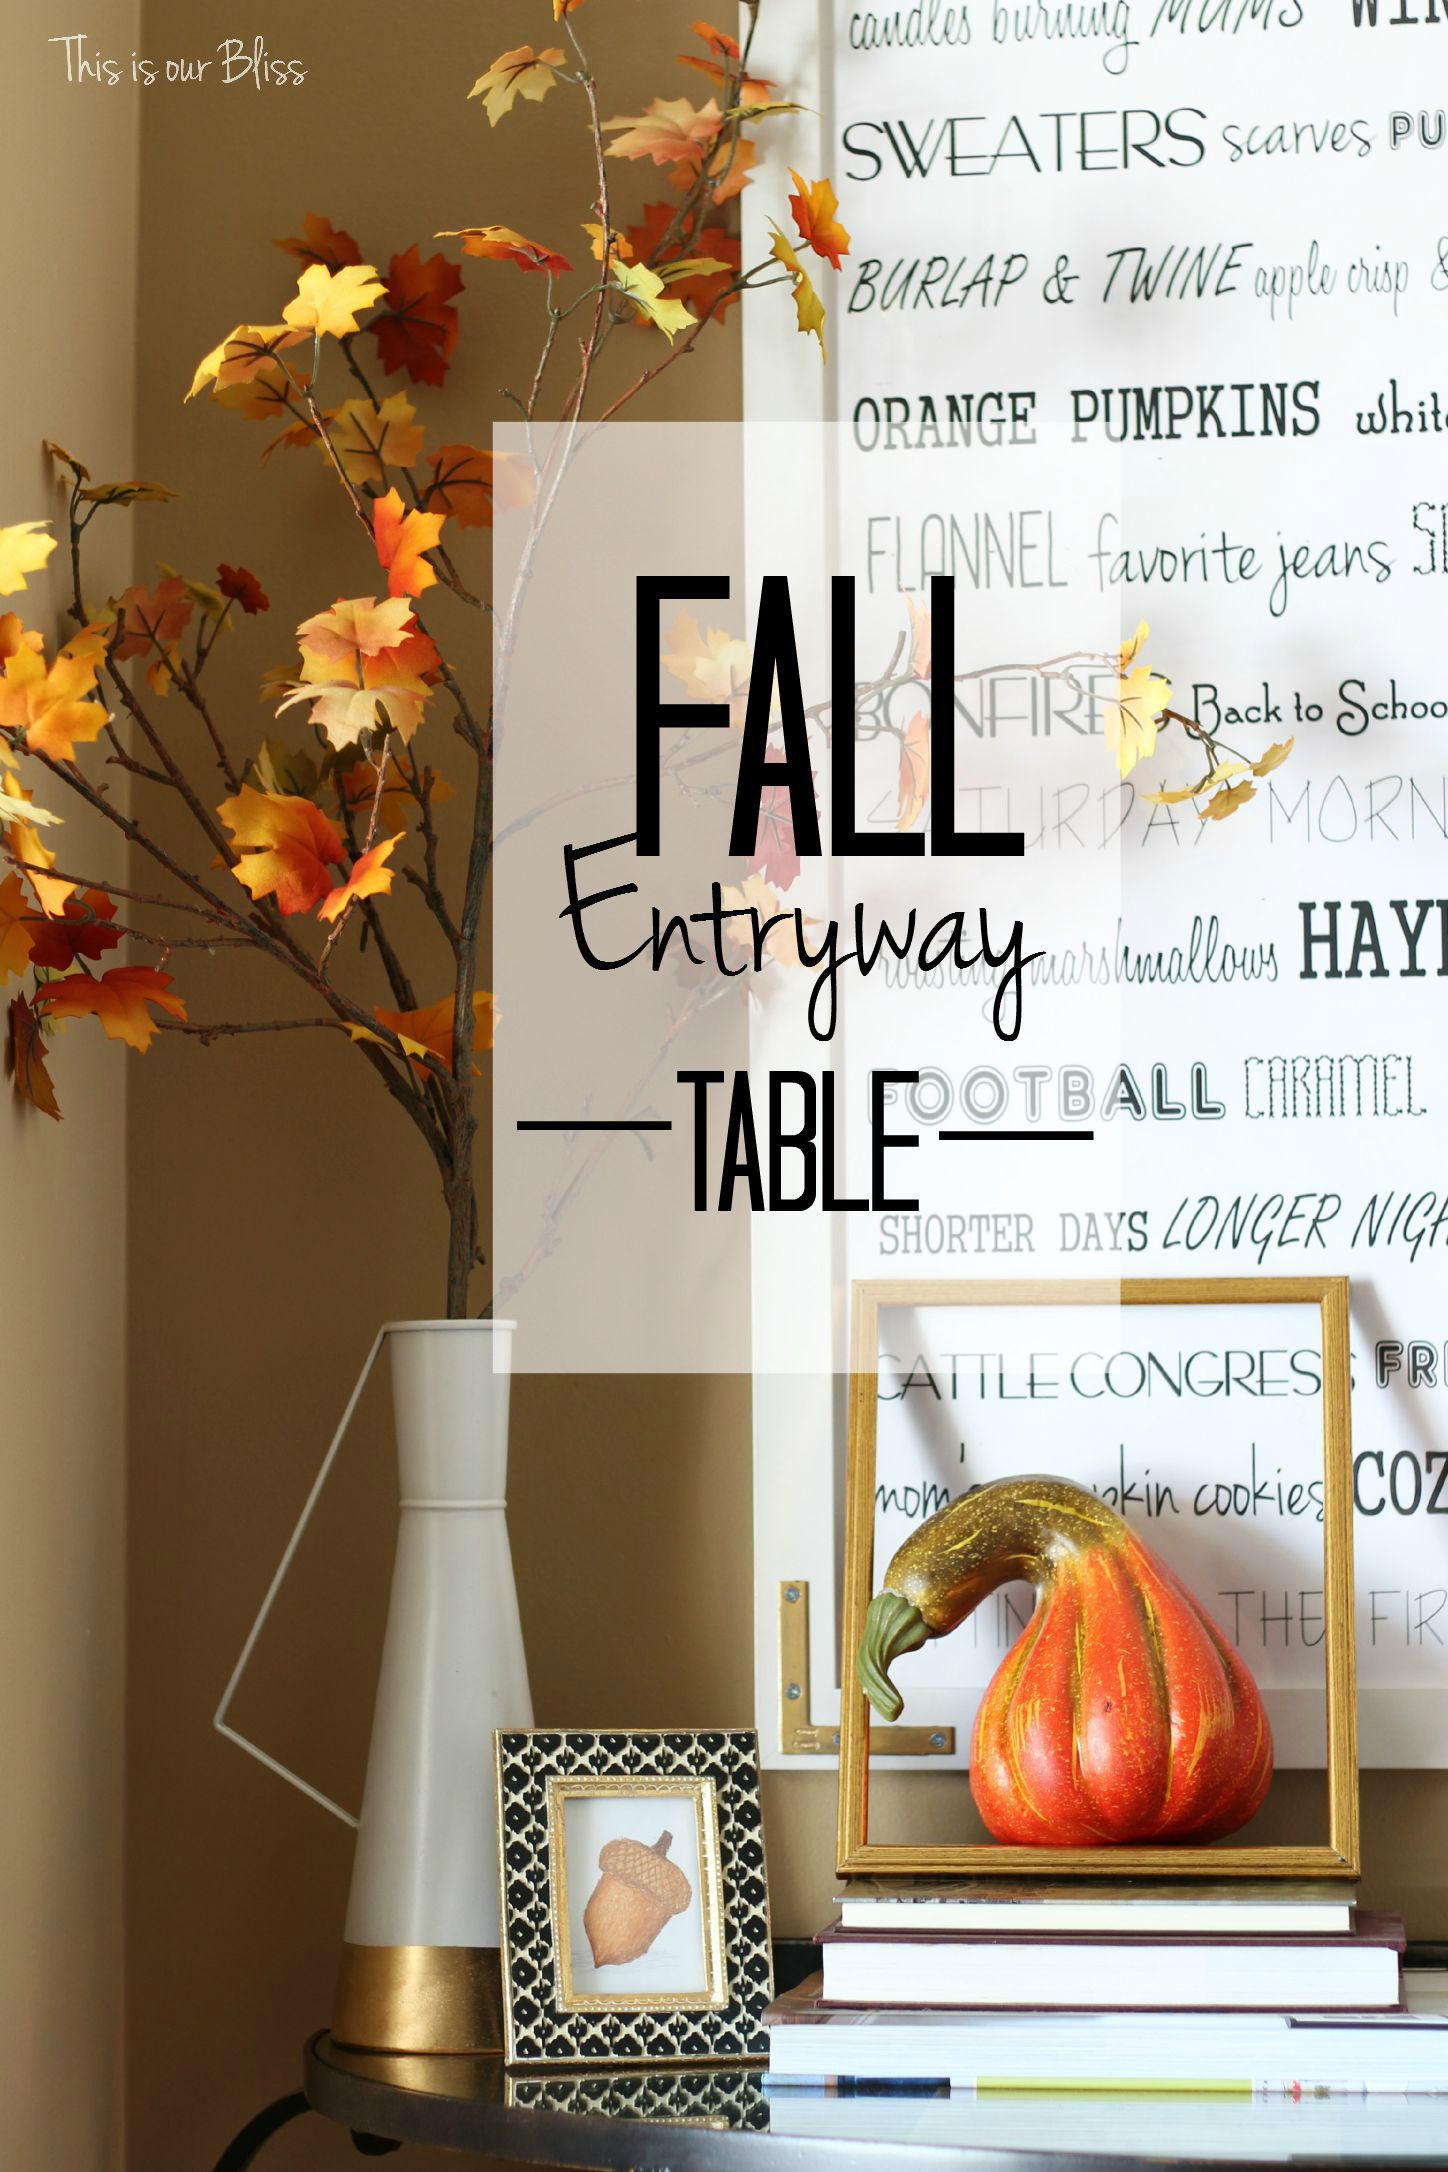 Let's decorate for fall, Foton Style! What's your fall vibe